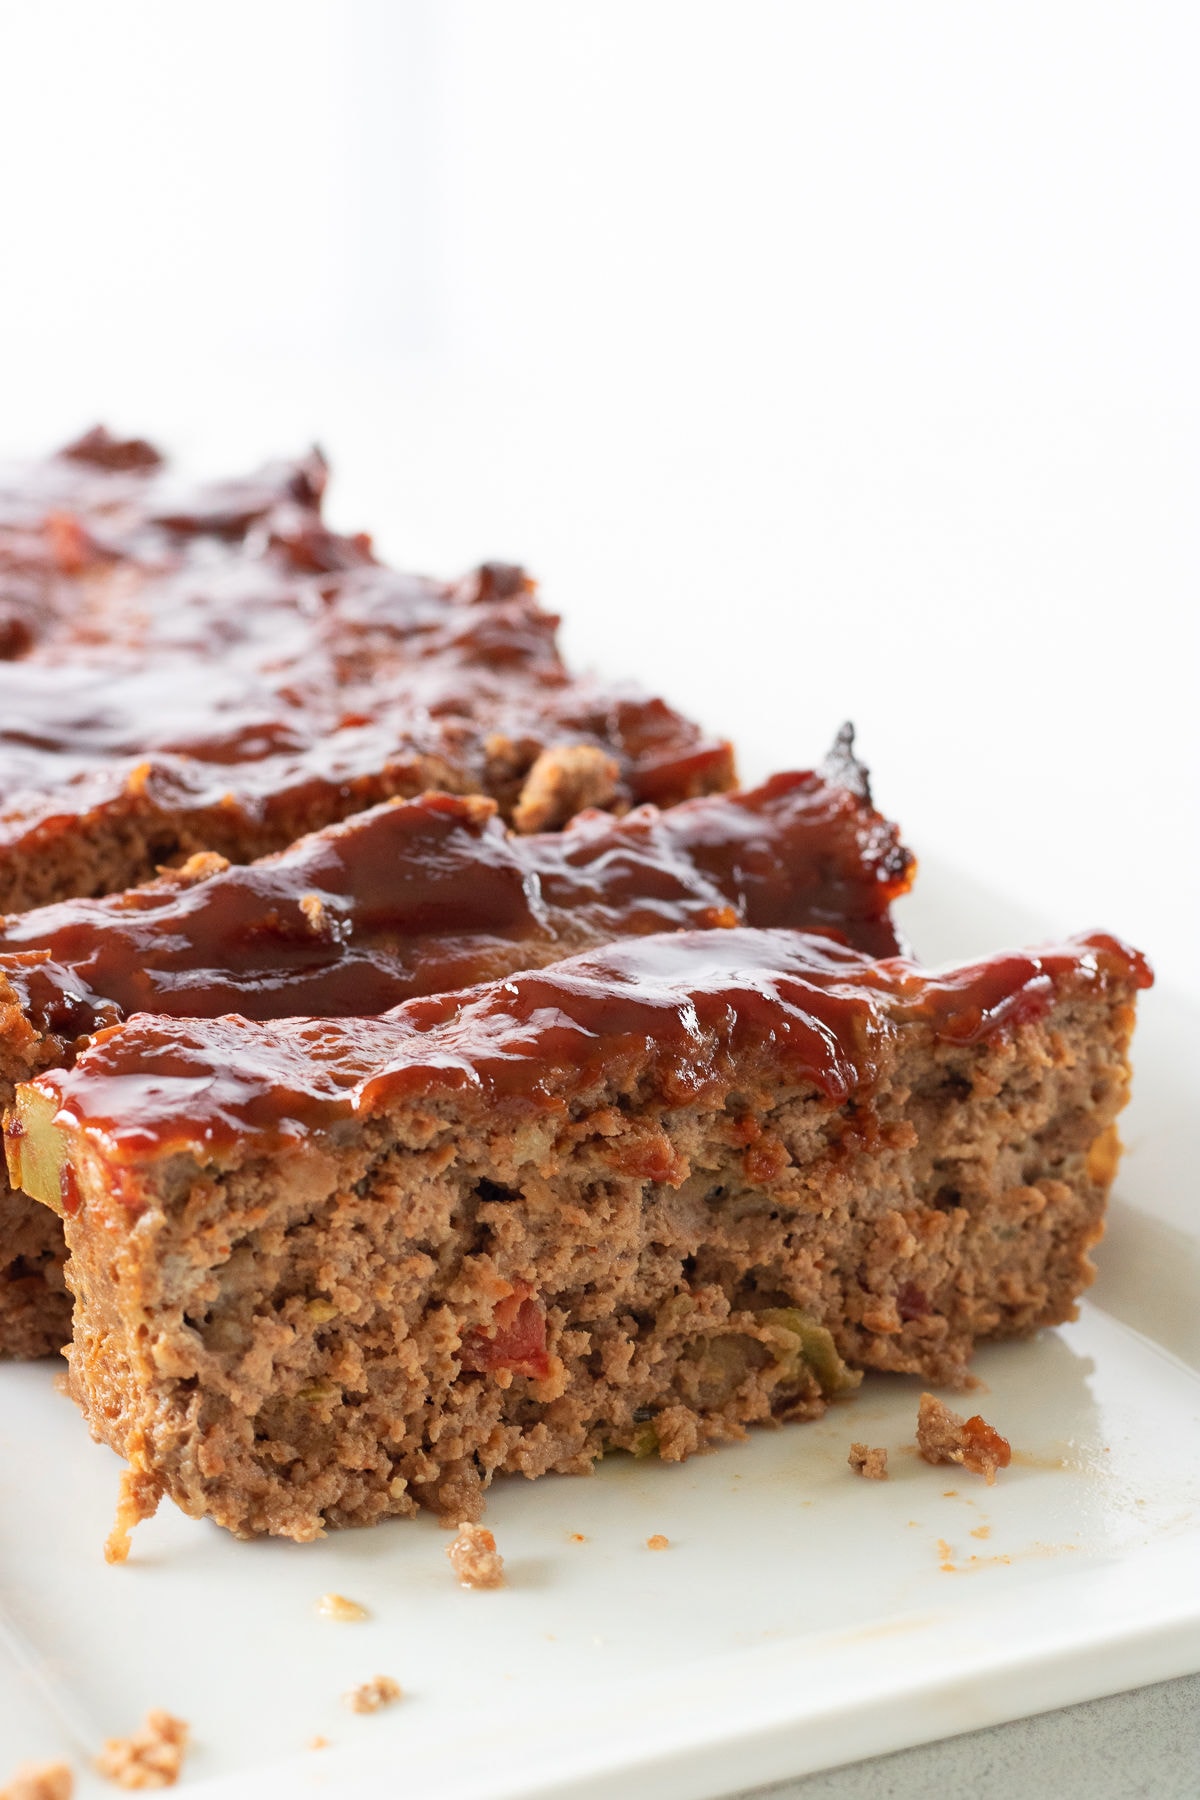 Meatloaf slices on a white plate.